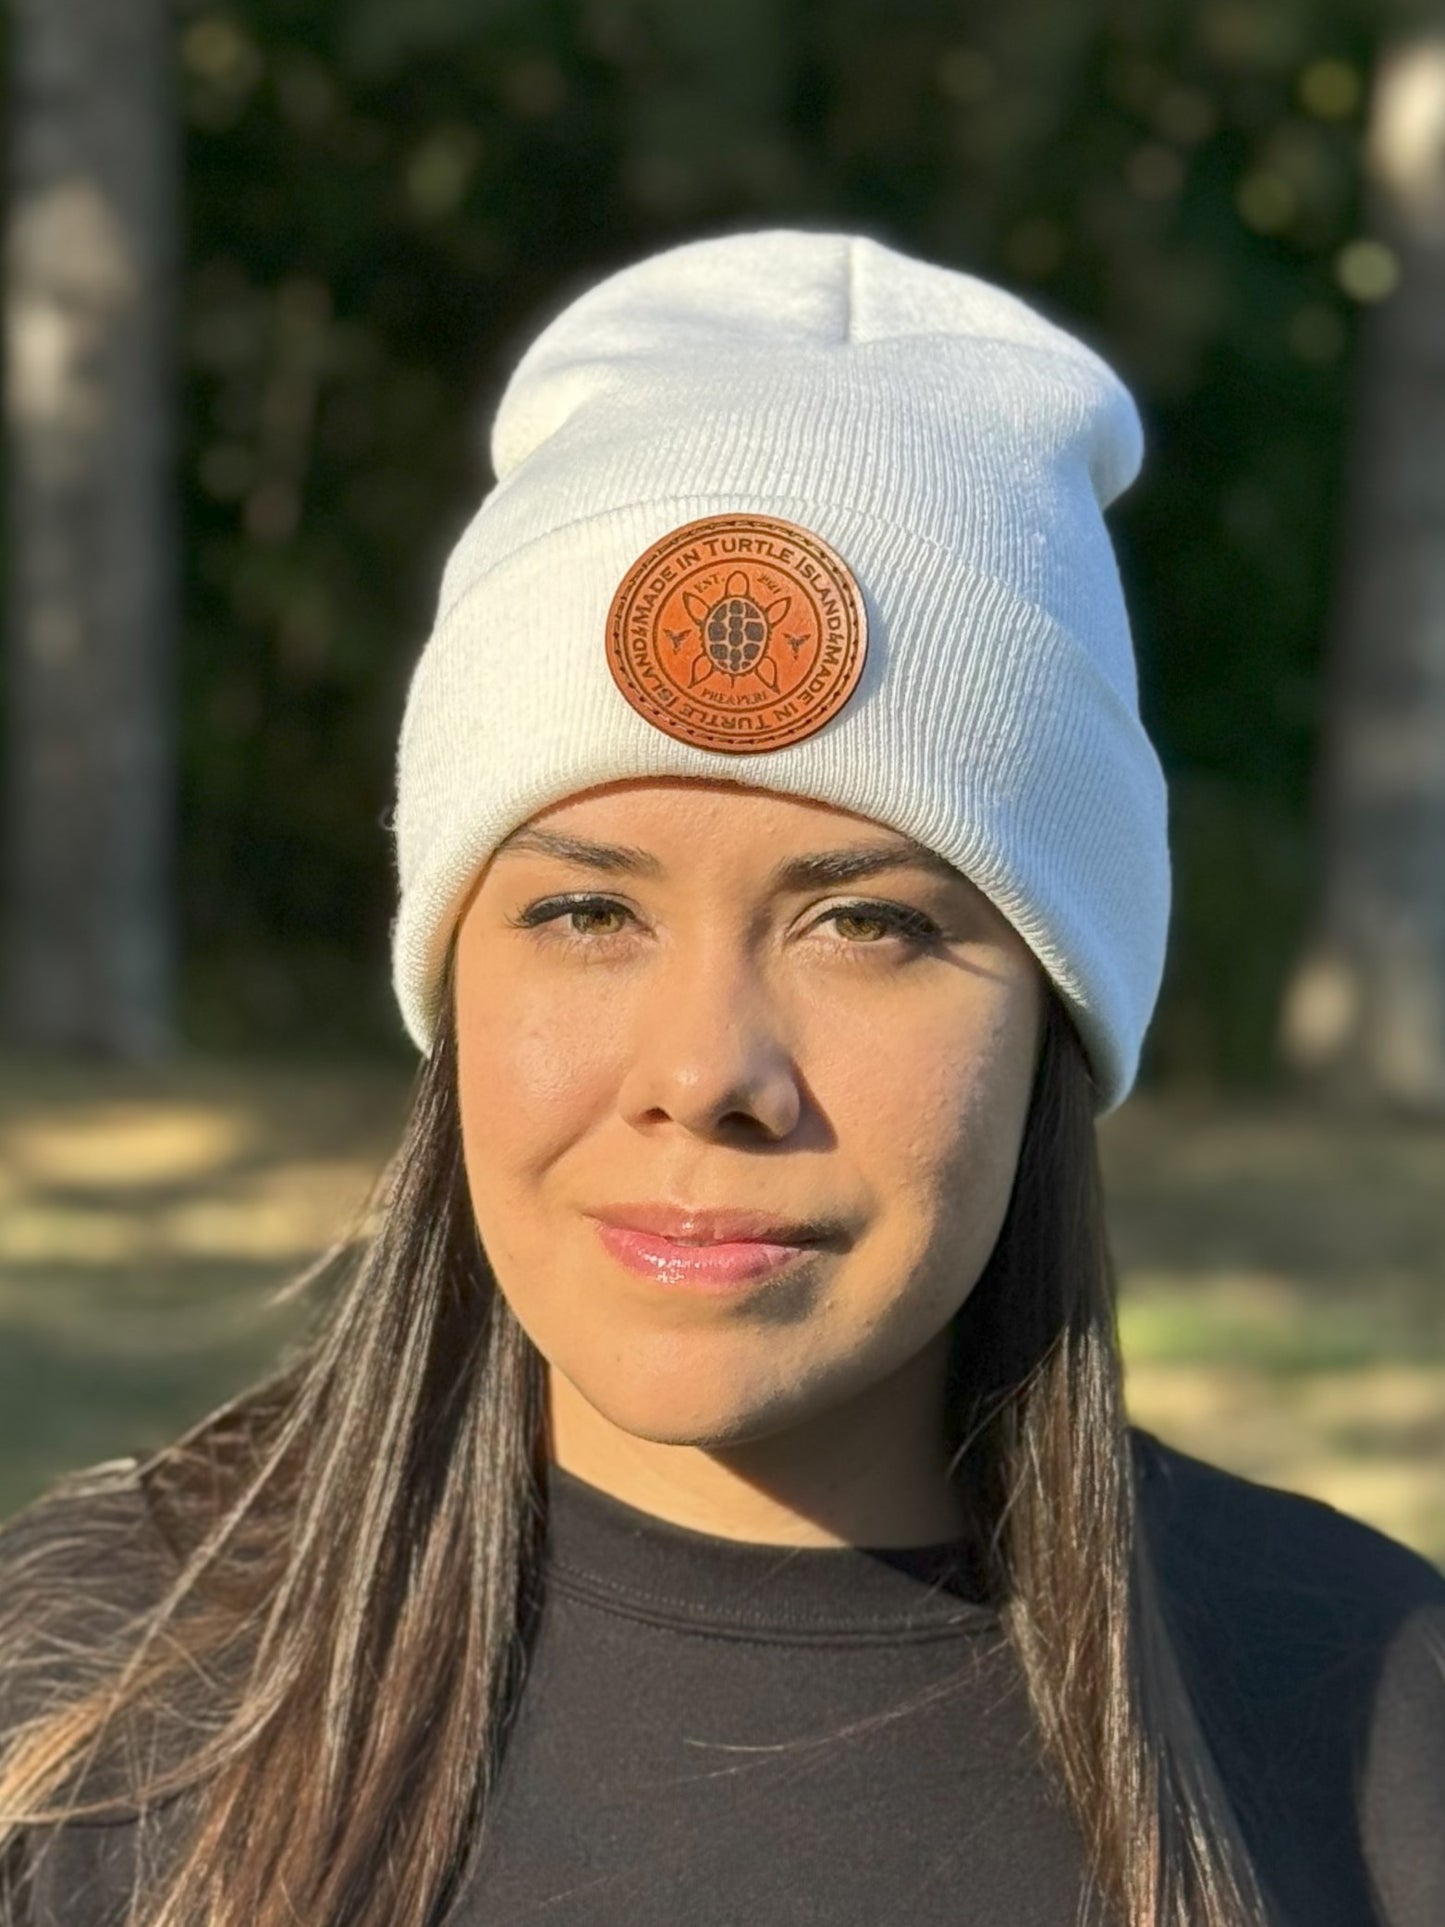 A woman wearing an off-white toque with a leather patch with and engraving of a turtle with the words "Made in Turtle Island" around it.